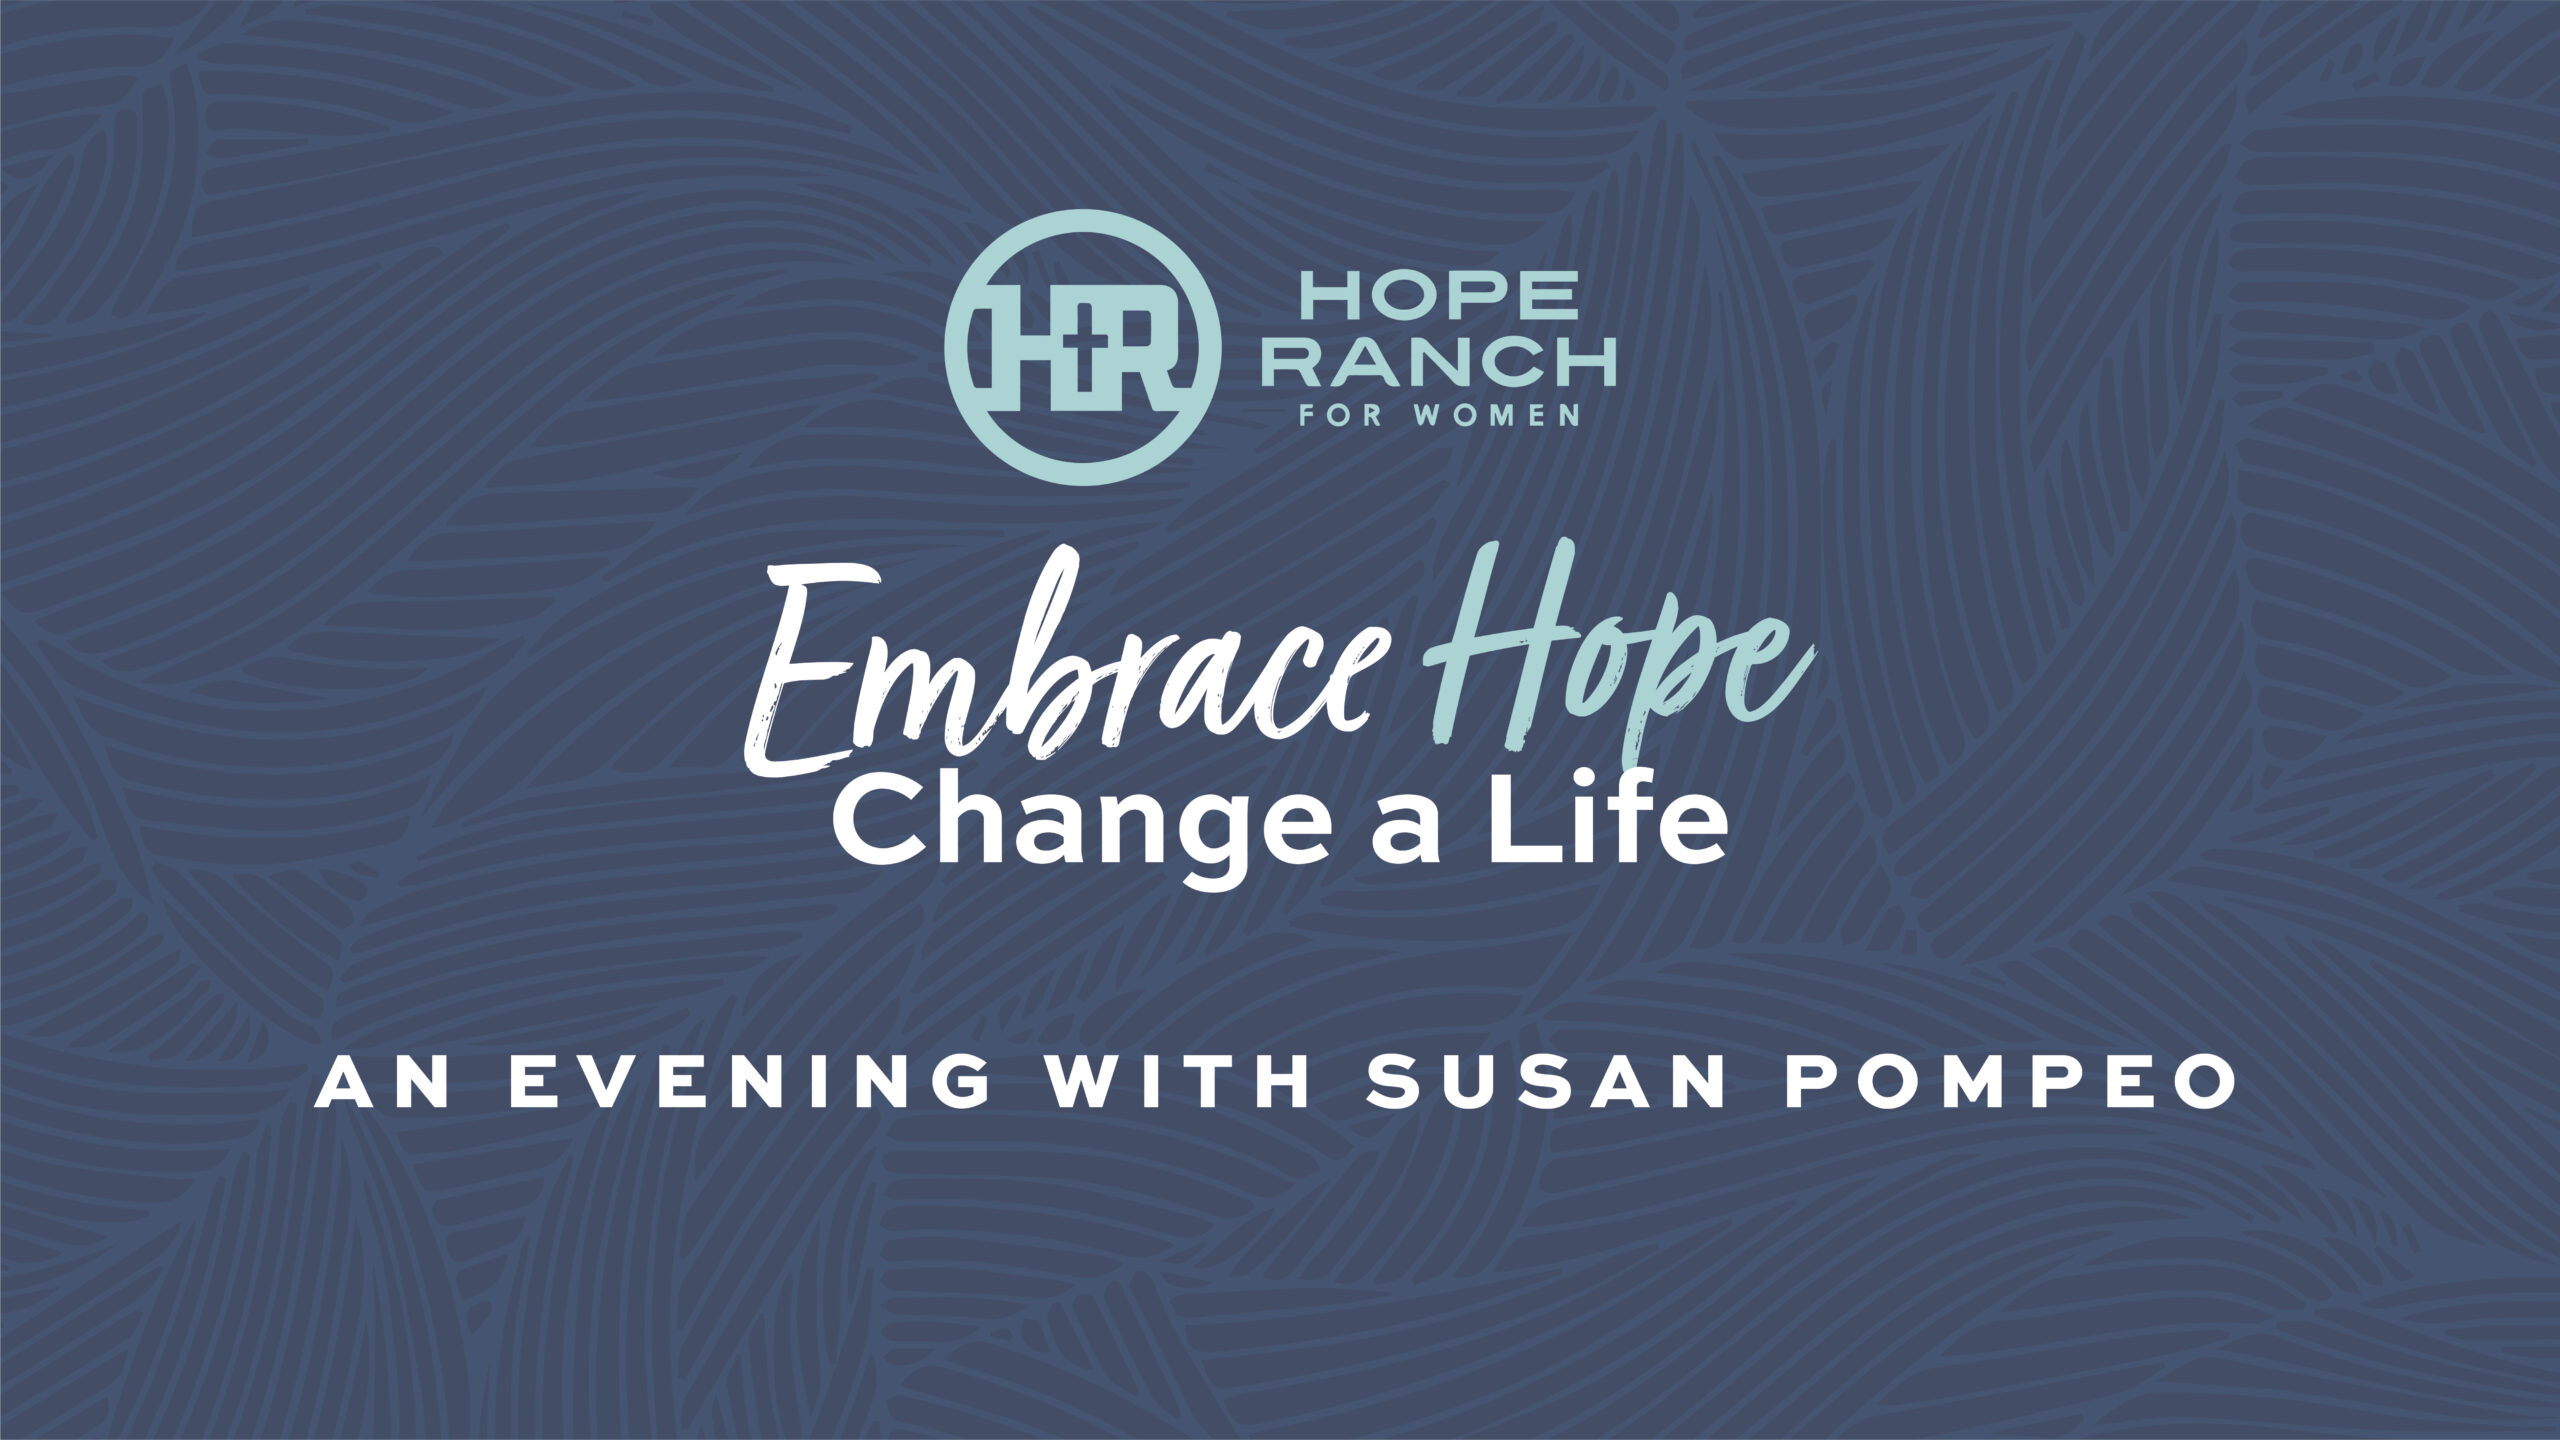 Hope Ranch for Women presents: Embrace Hope, Change a Life. An evening with Susan Pompeo.